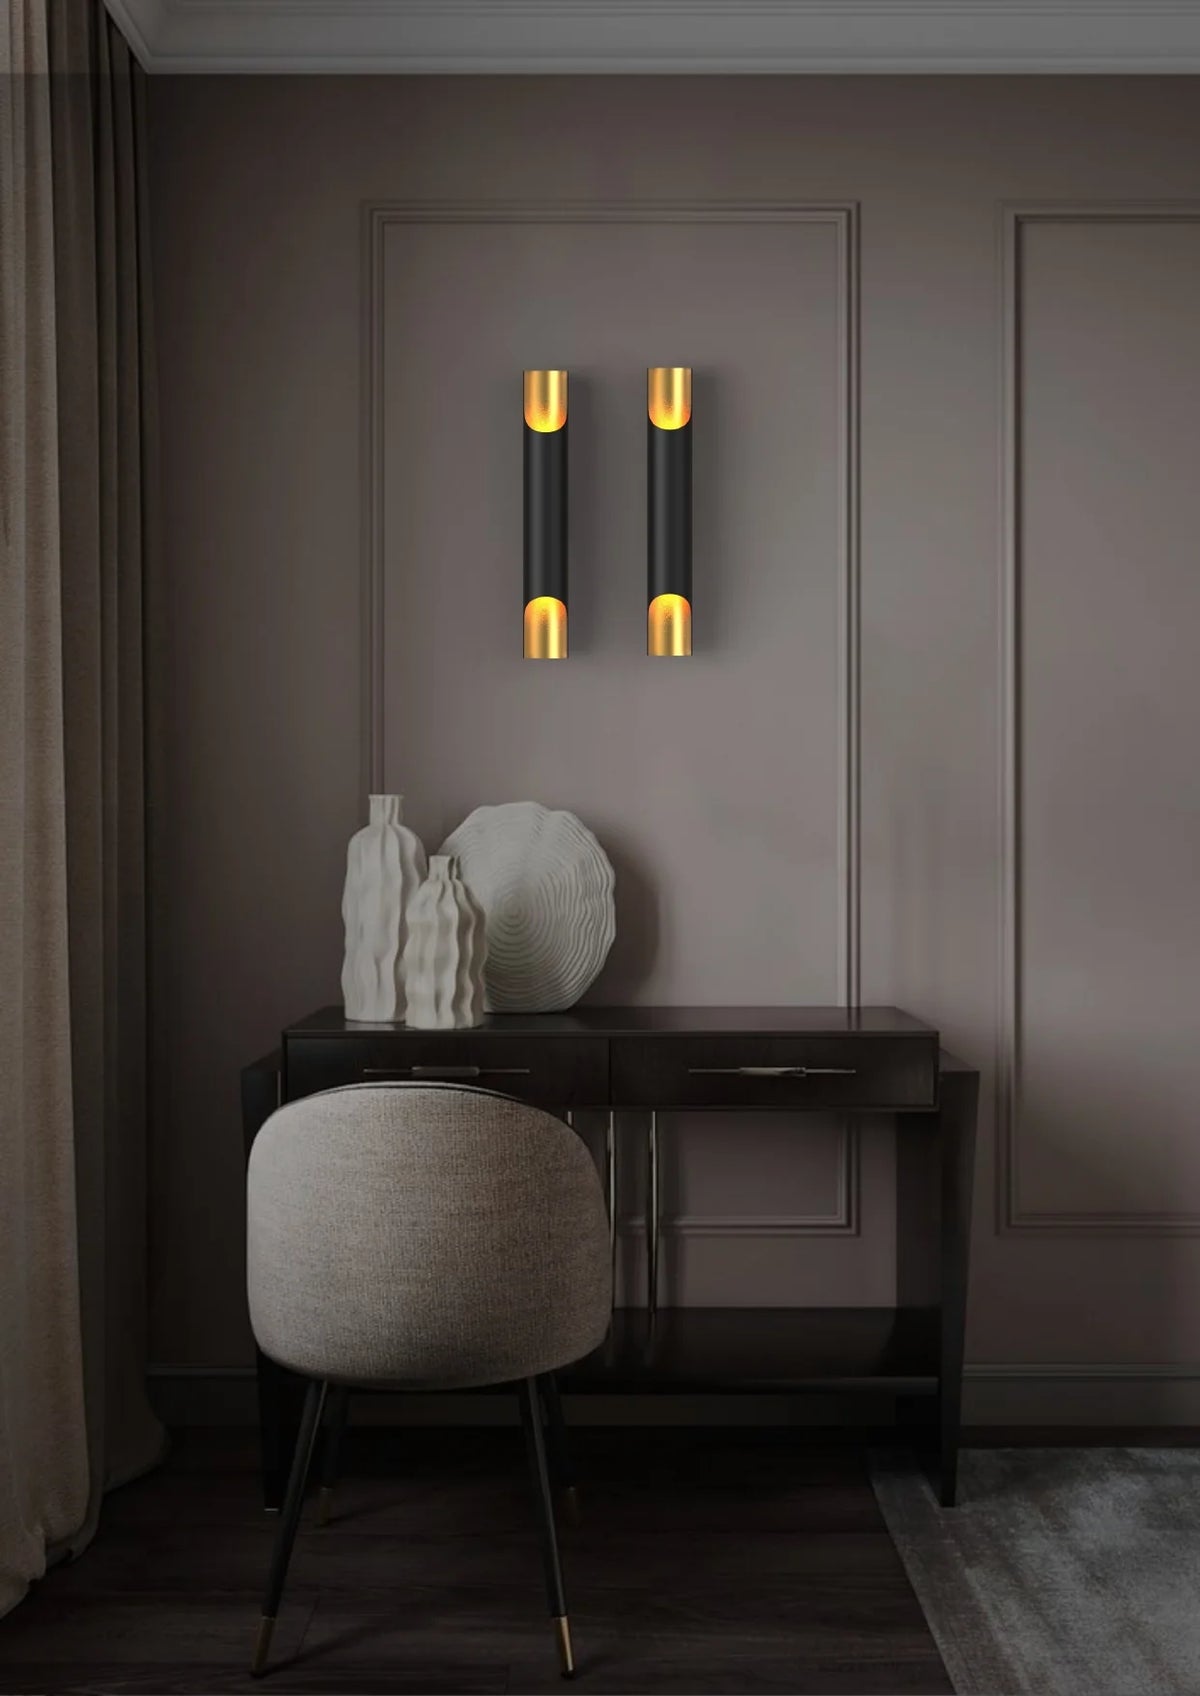 Up-End Wall Lamp